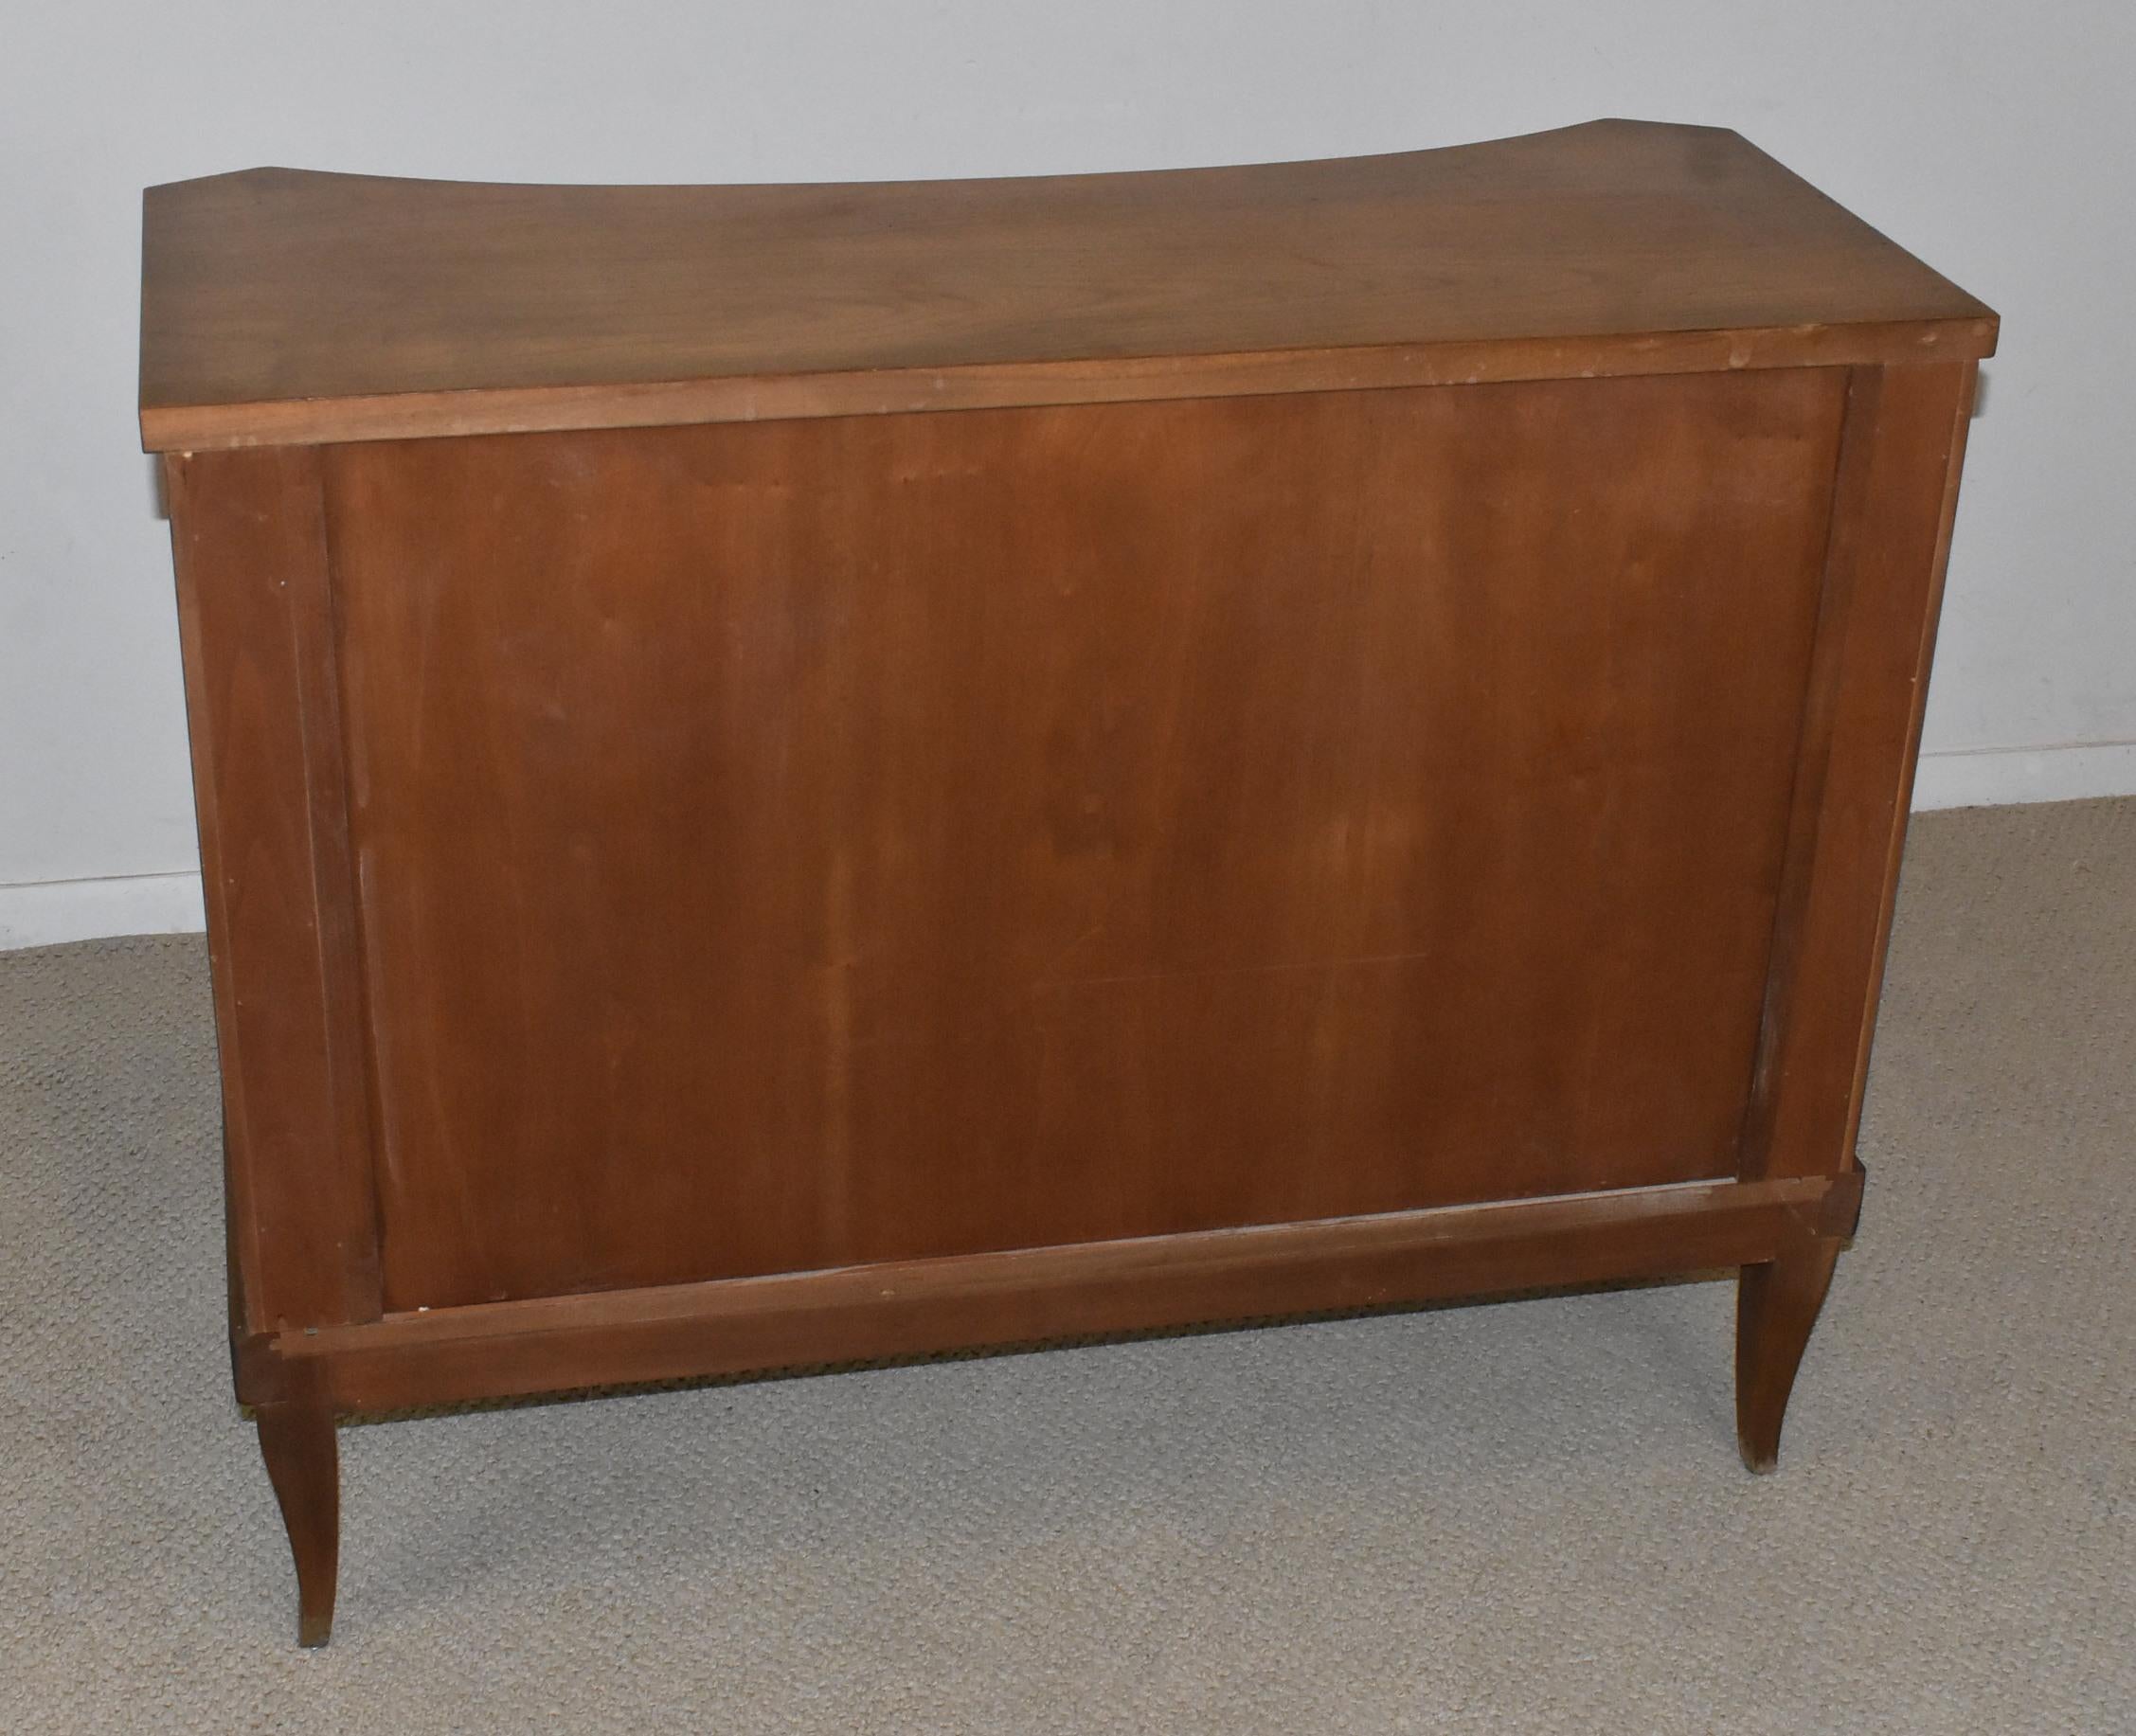 20th Century Baker Furniture Cherry Regency Style Commode / Chest with Tambour Doors